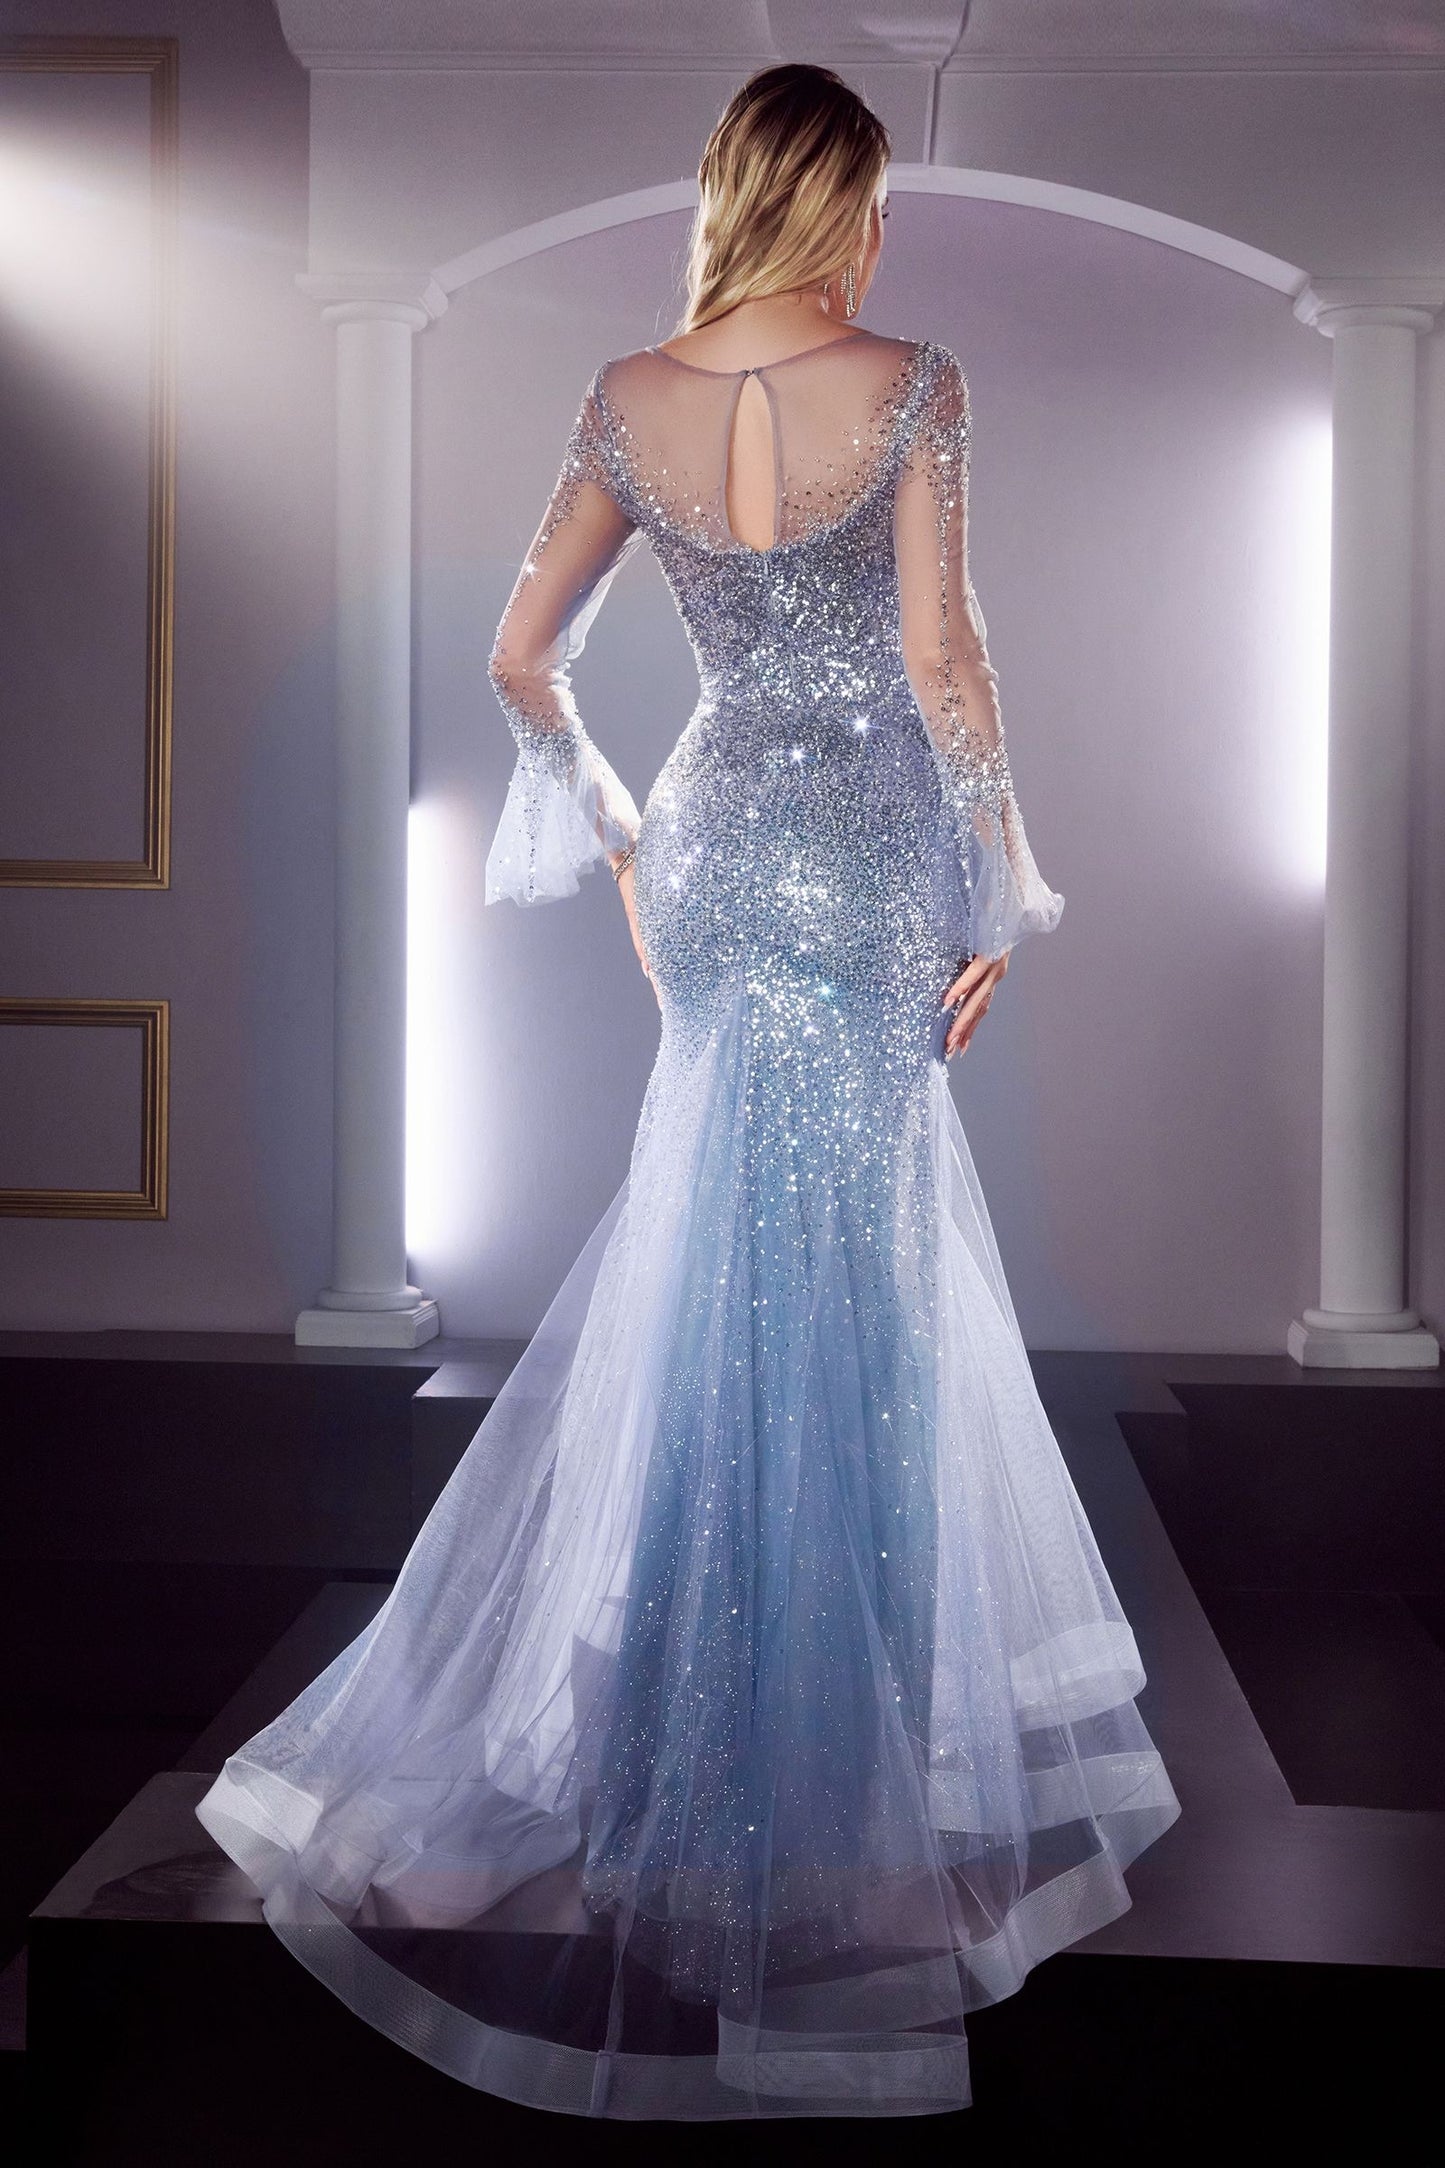 CD24-CB122 LONG BELL SLEEVE EMBELLISHED GOWN